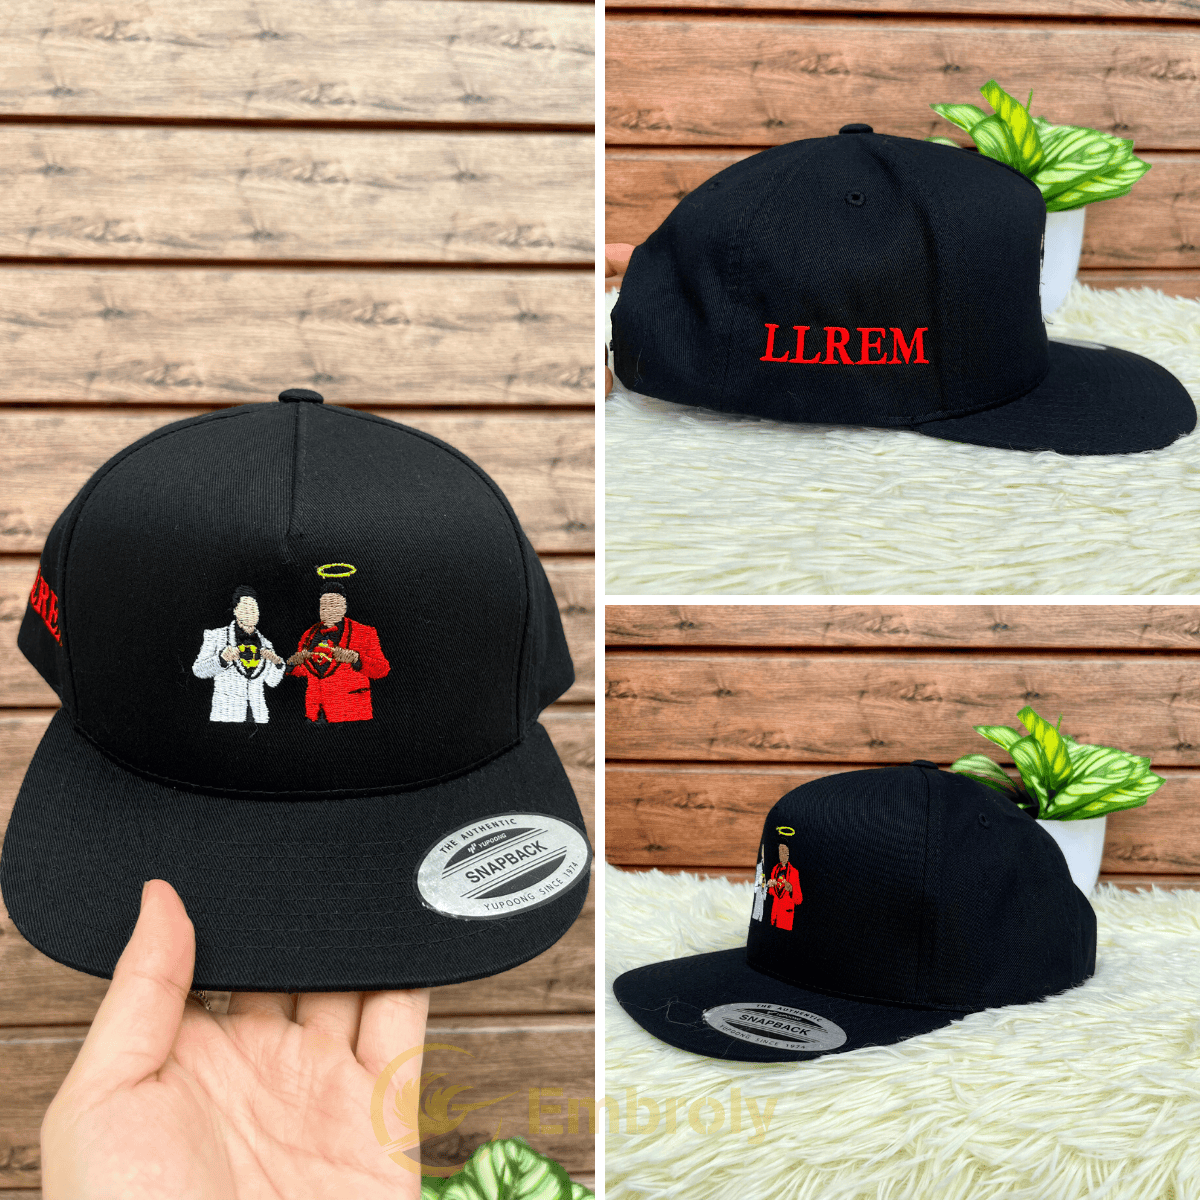 Snapback Hat - Personalized Initials Letter - Embroidered